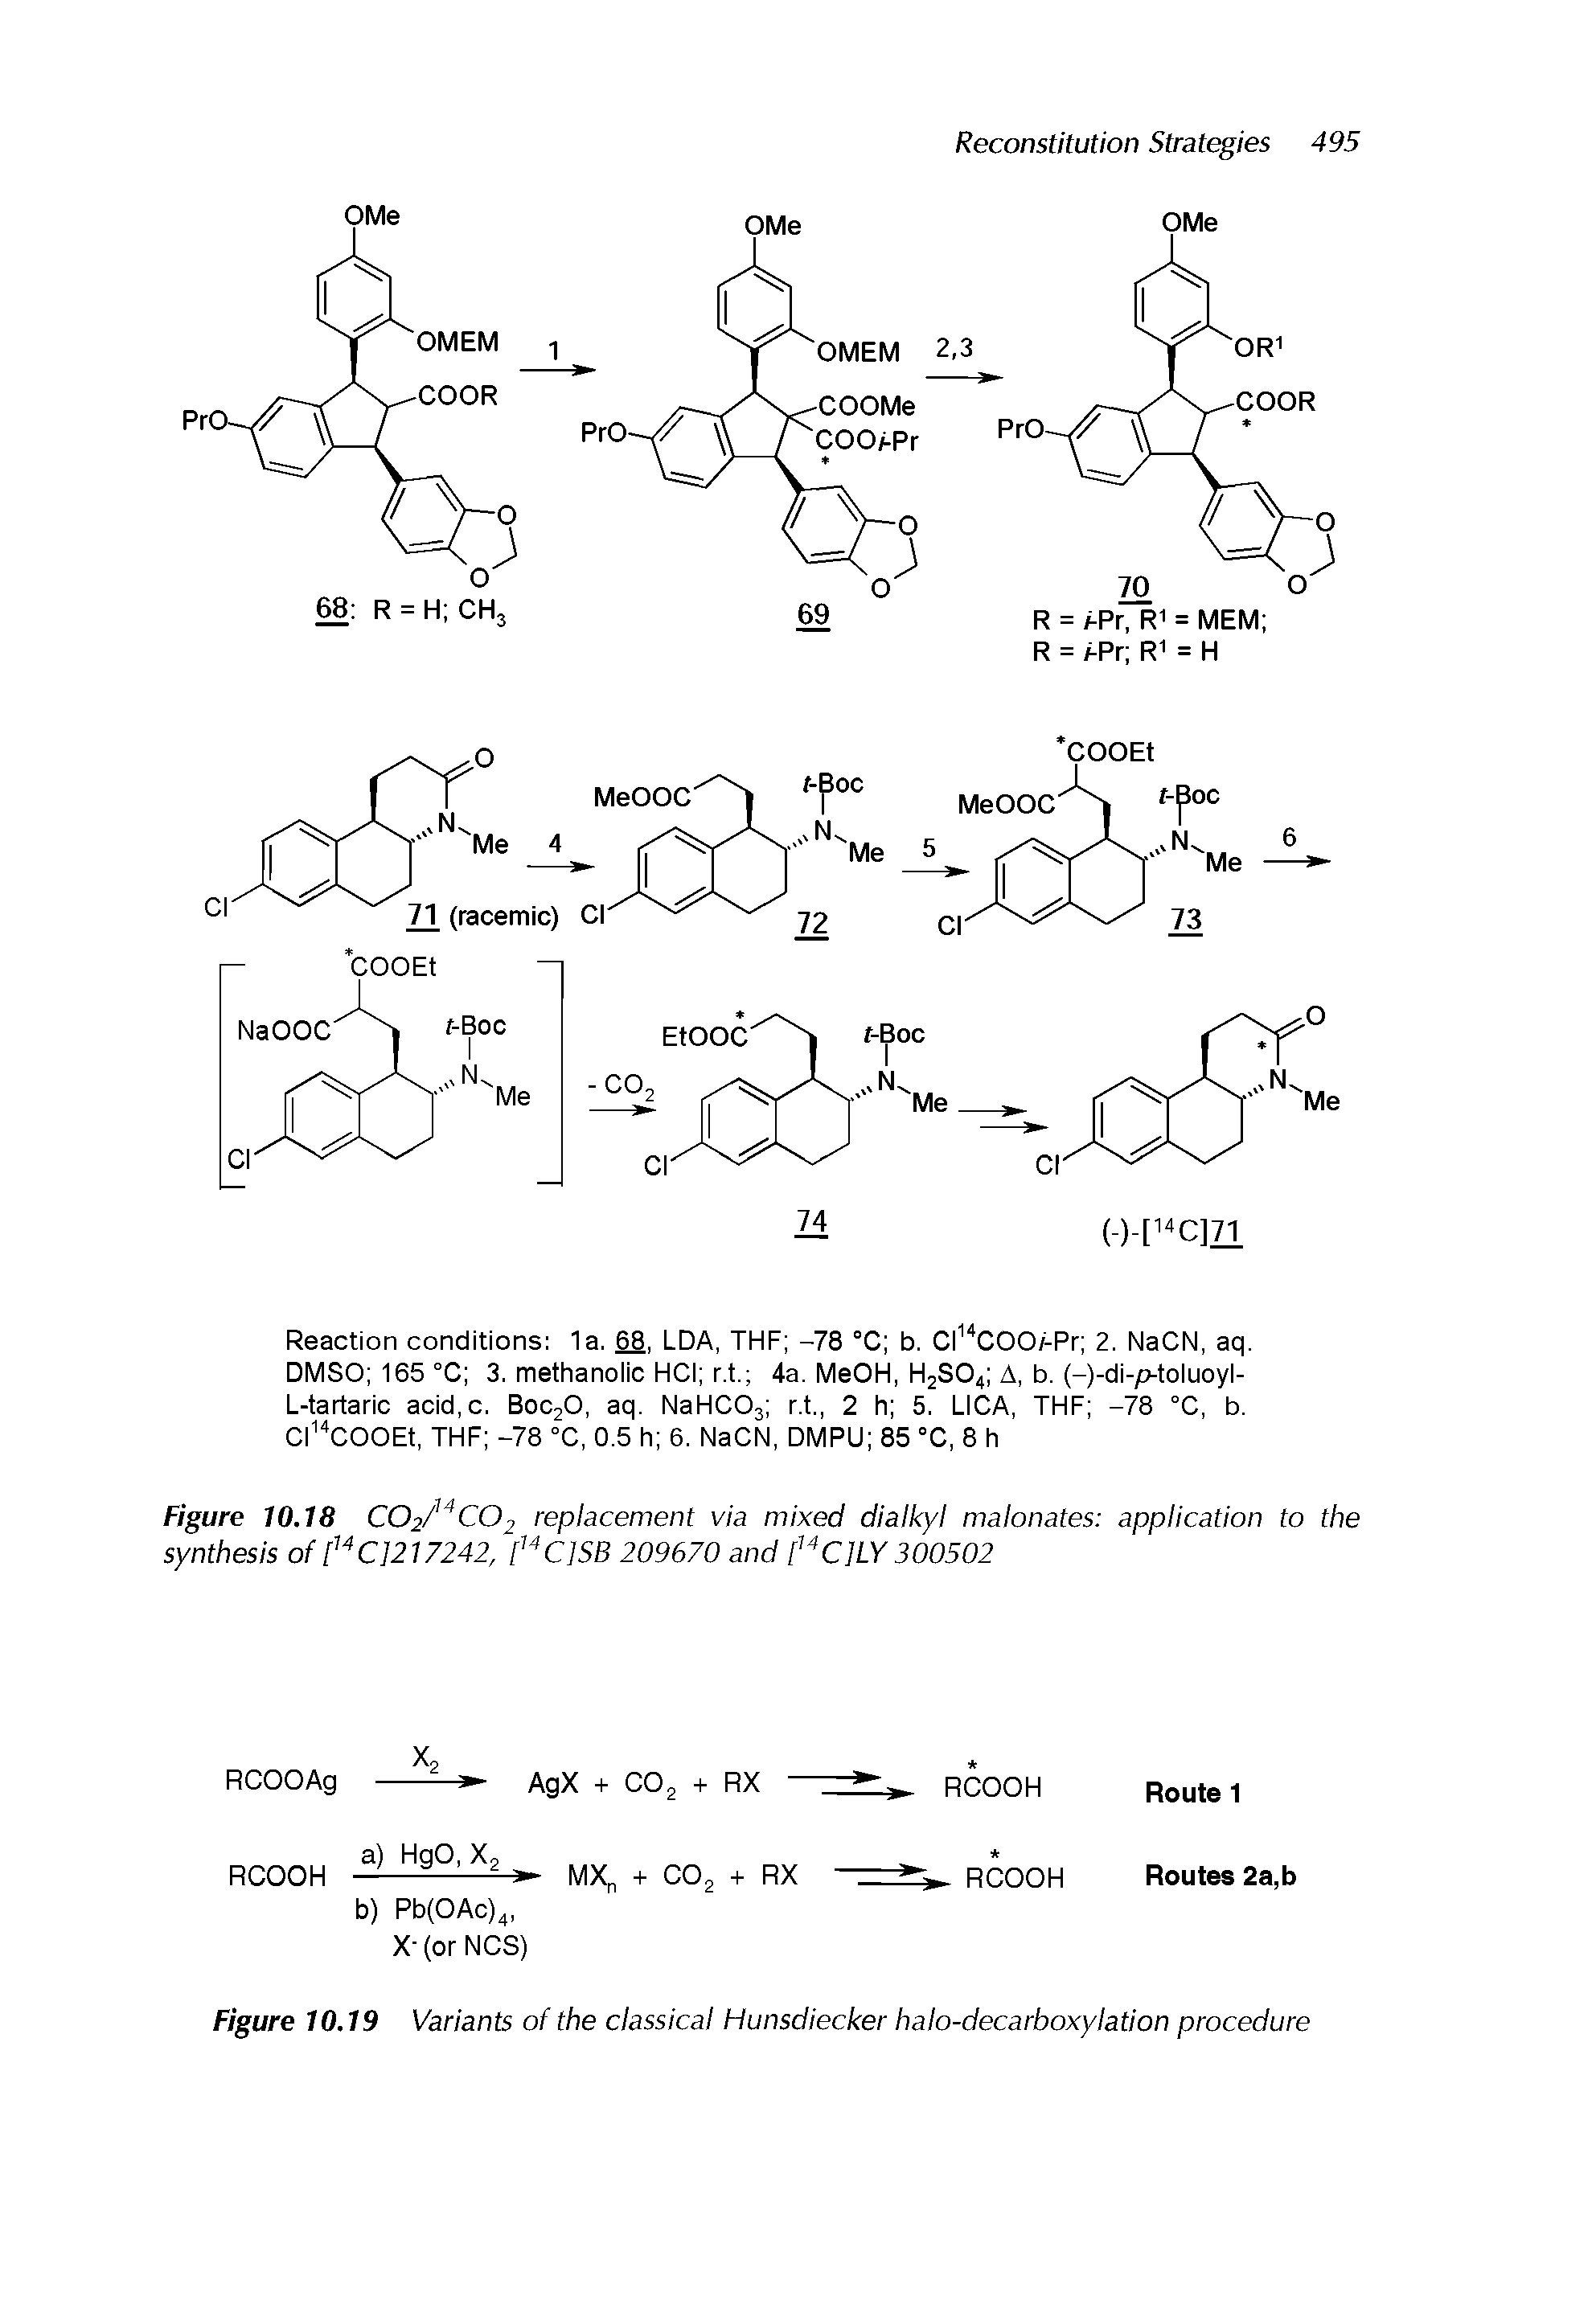 Figure 10.19 Variants of the classical Hunsdiecker halo-decarboxylation procedure...